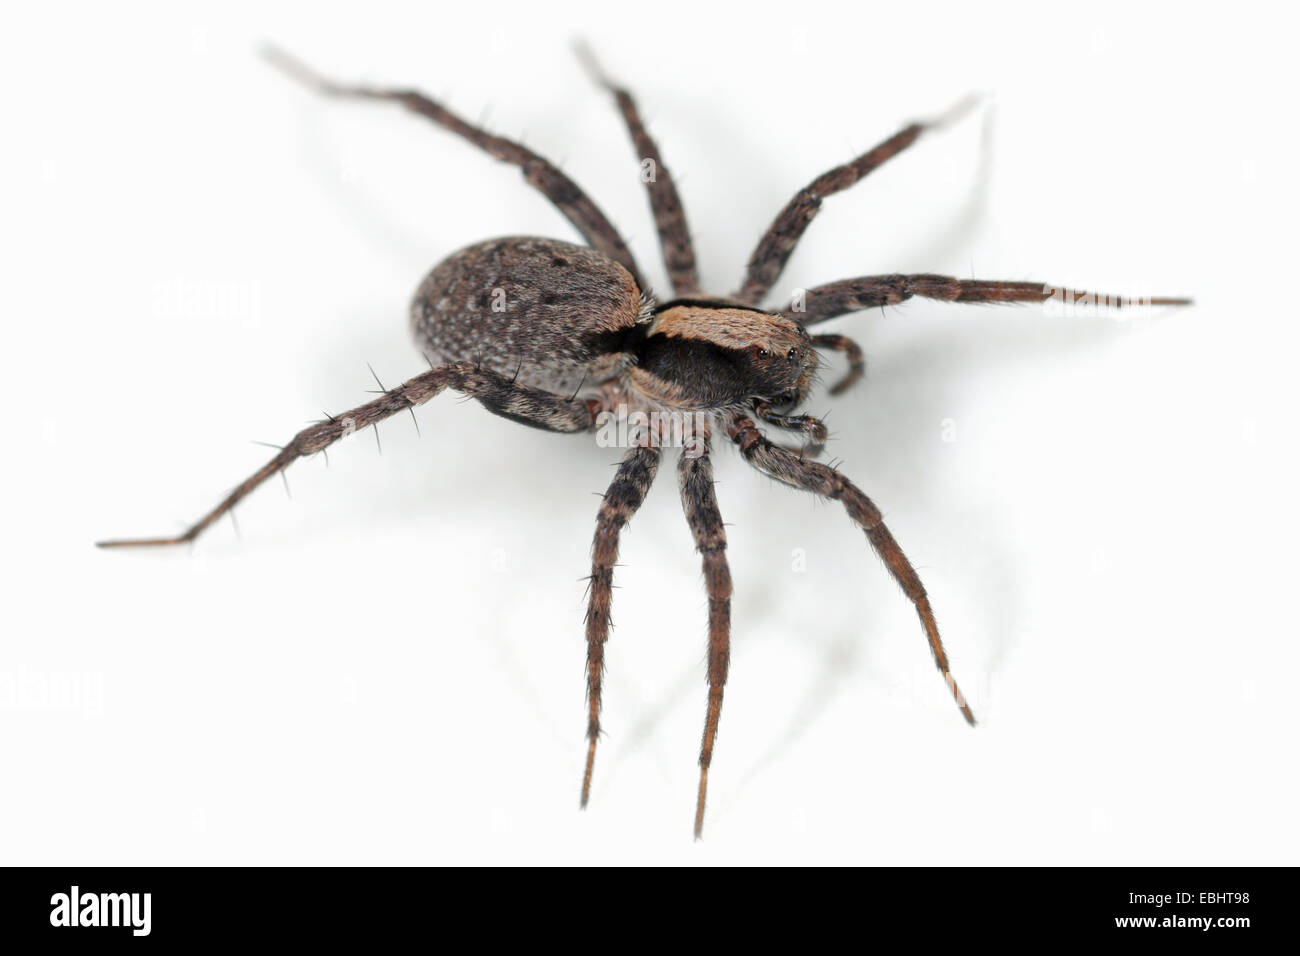 A female Burnt Wolf spider (Xerolycosa nemoralis) on a white background. Wolf spiders are part of the family Lycosidae. Stock Photo